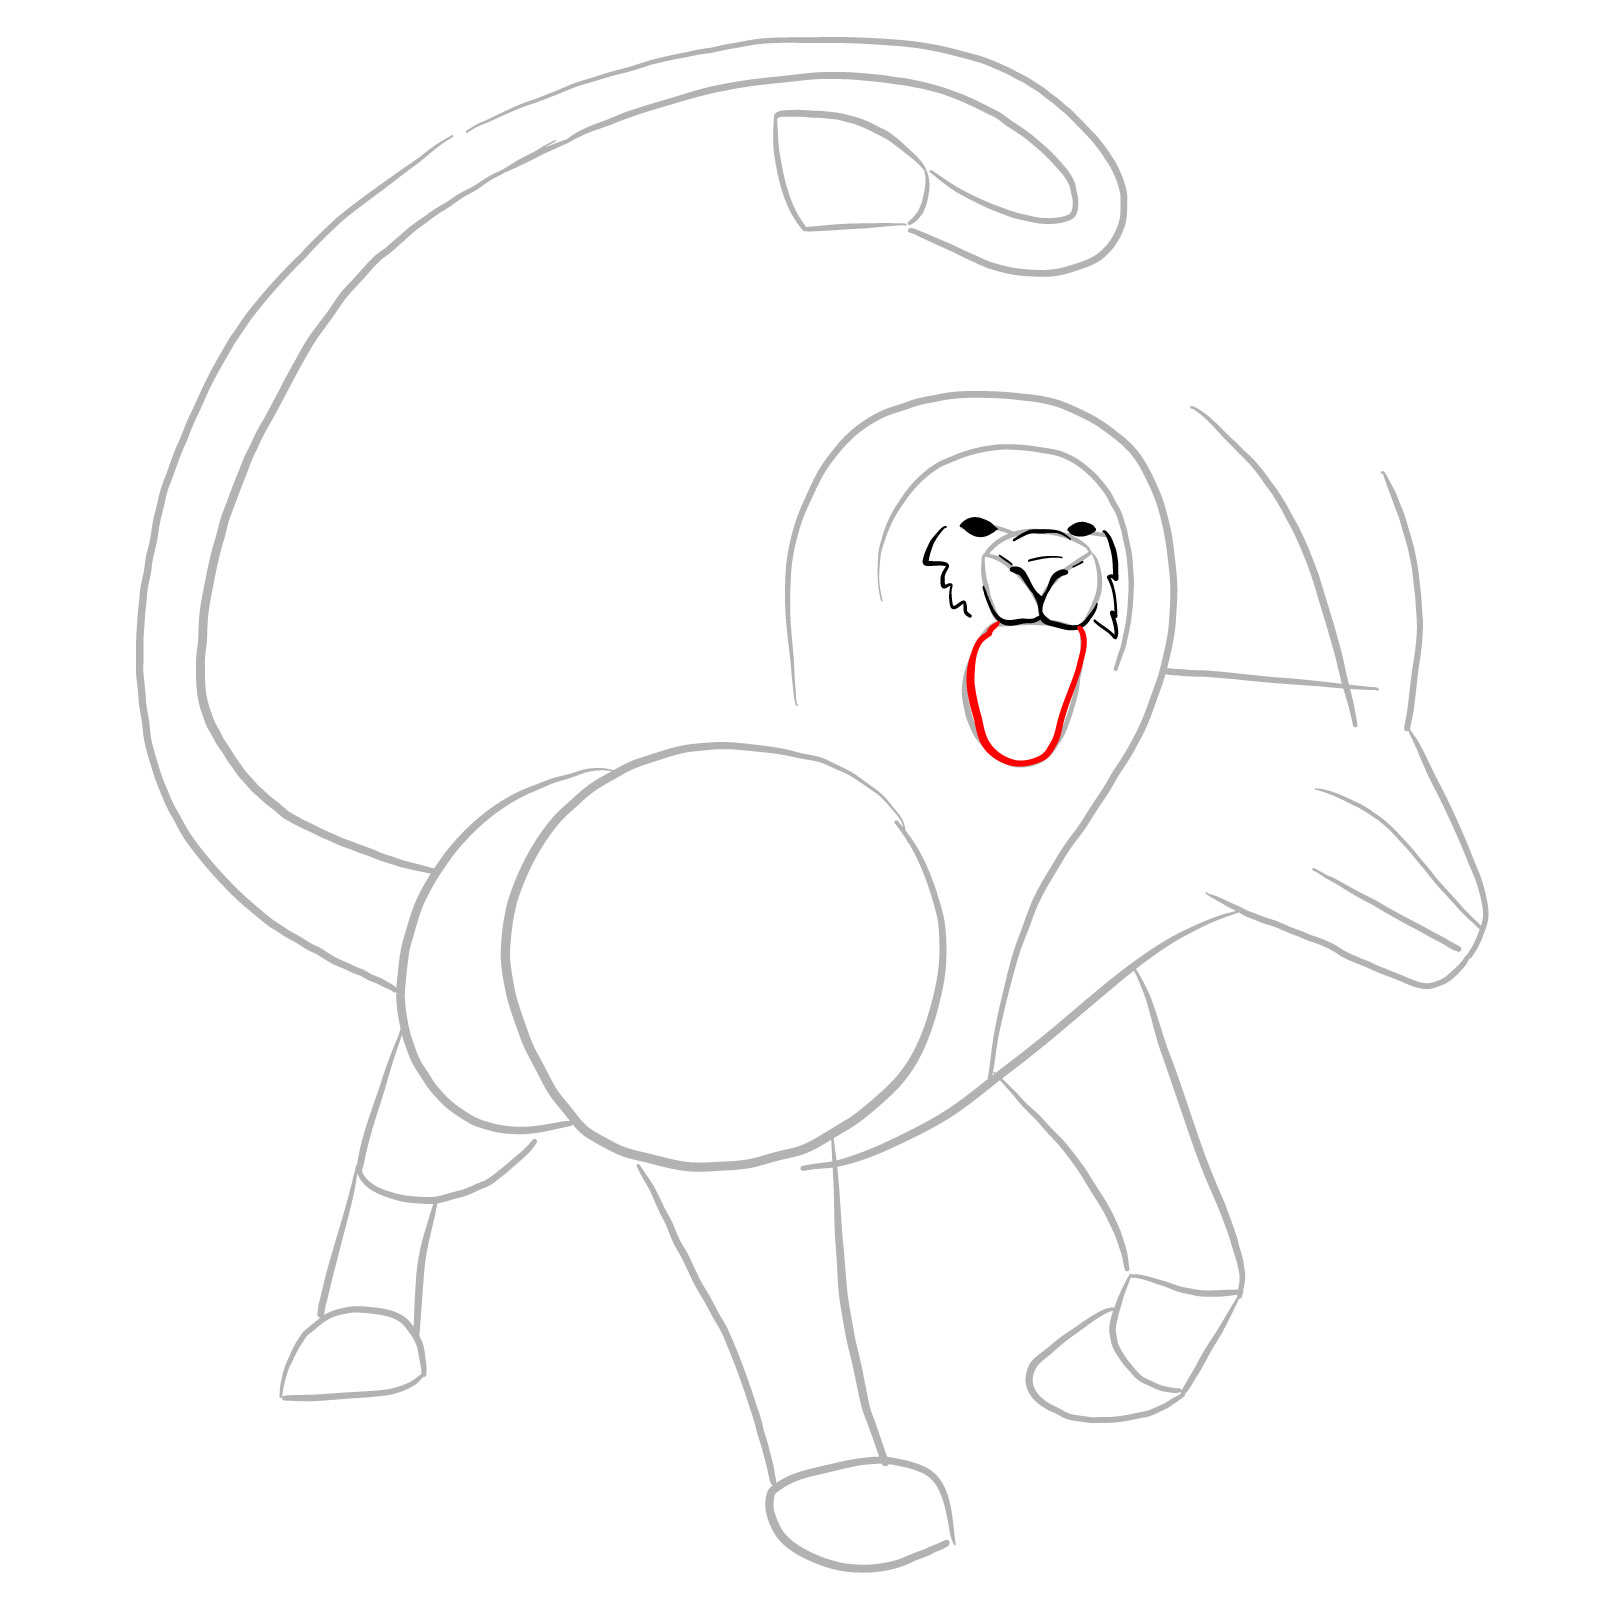 How to draw a Chimera - step 07